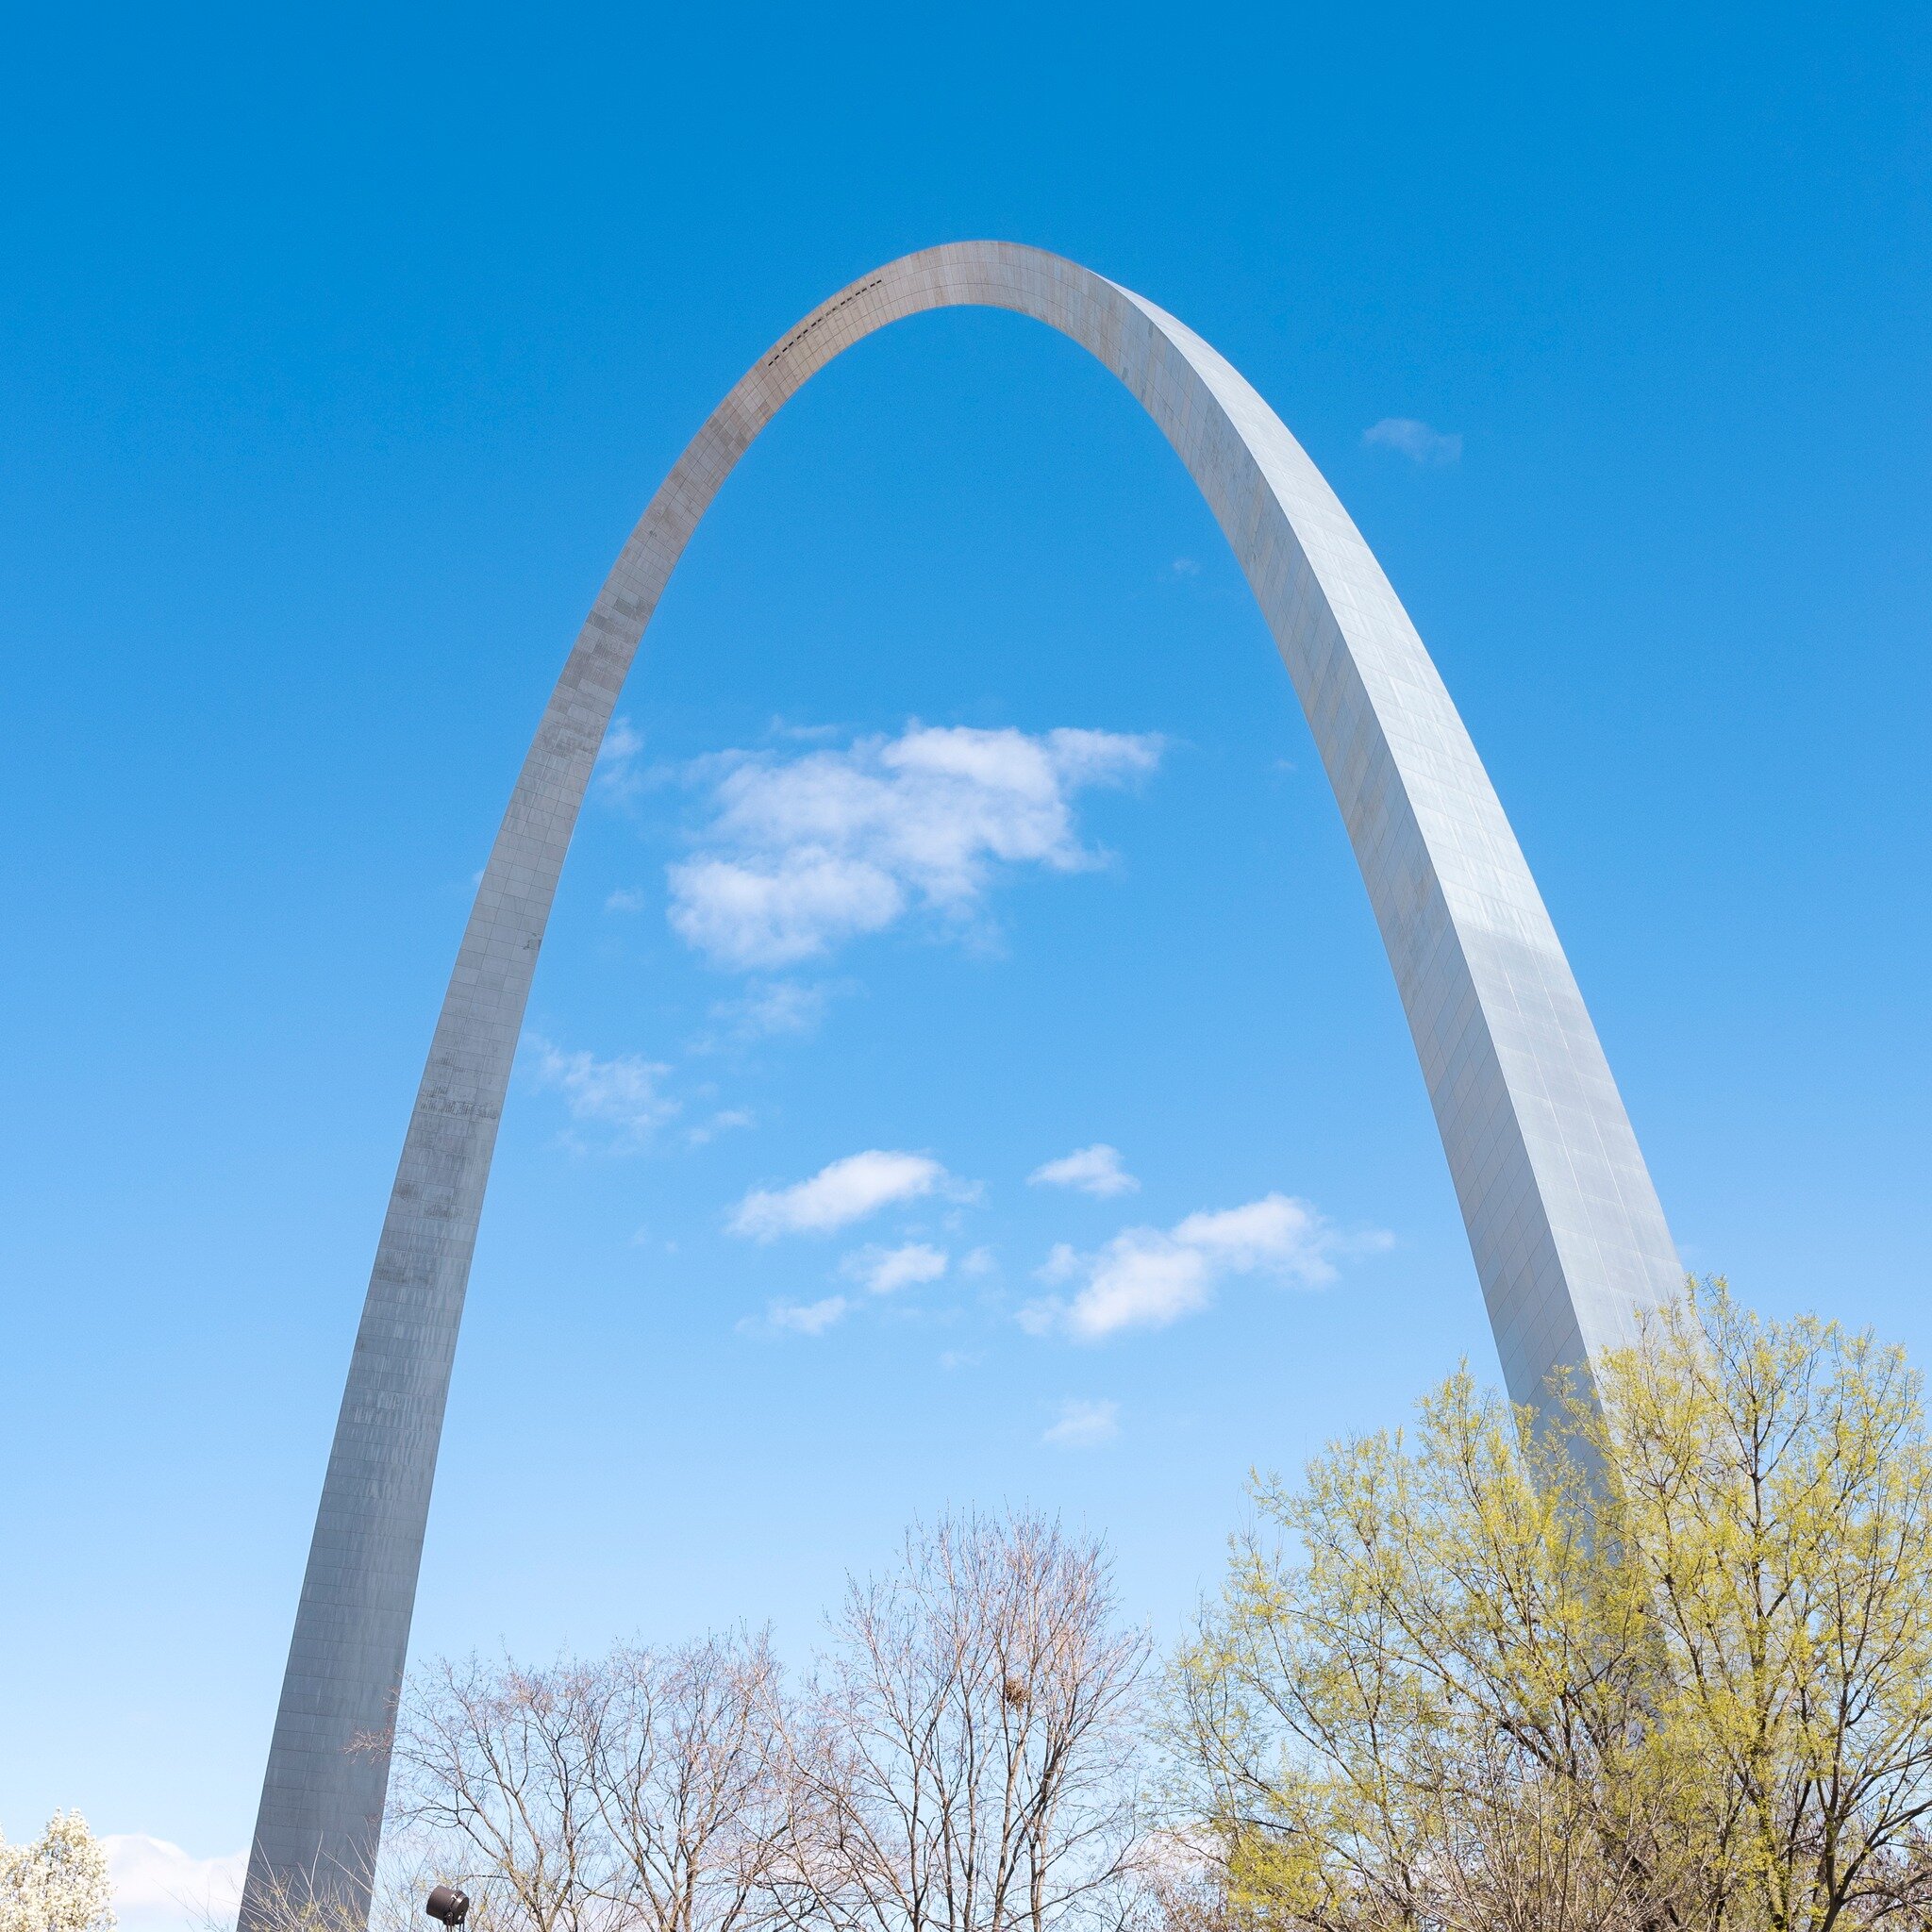 Gateway Arch📸

Another photo gig turned adventure with @cvandesteeg11. 

Silly stuff for the algorithm:
#landscape #arch #gatewayarch #stlouis #stlouismo #landscapephotography #photo #photography #fickephotography #travel #travelphoto 

The technica